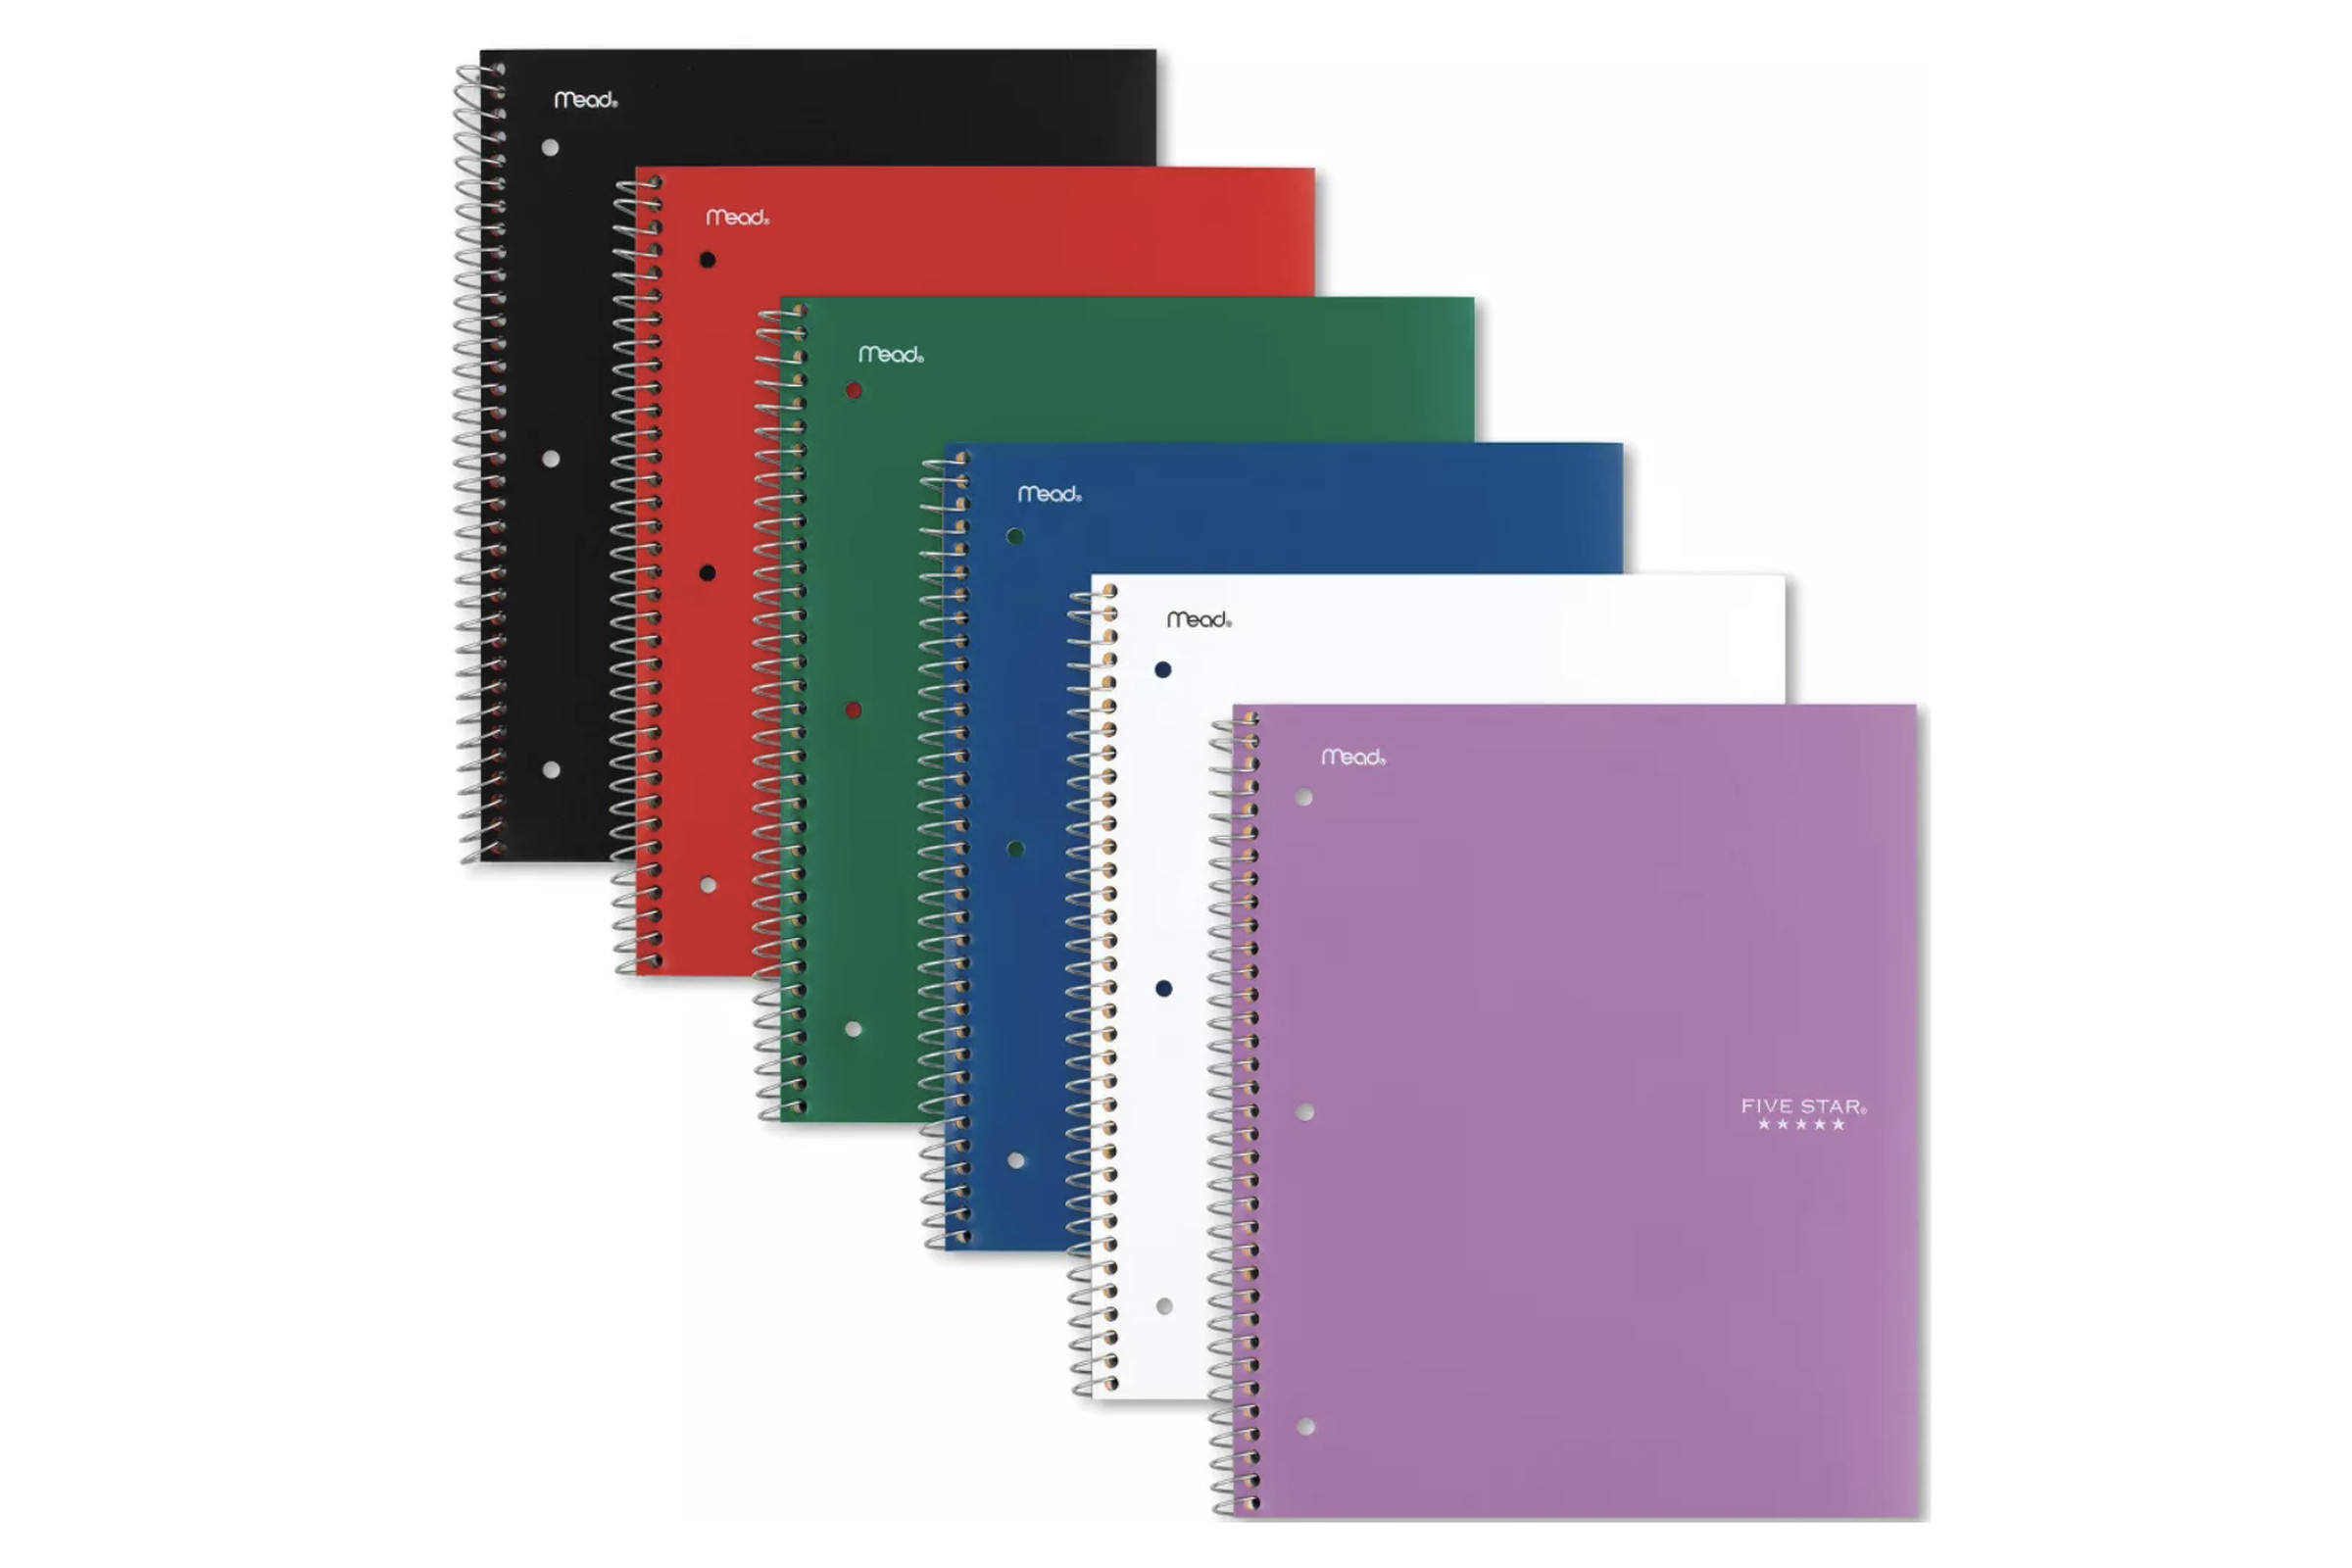 A group of notebooks of different colors